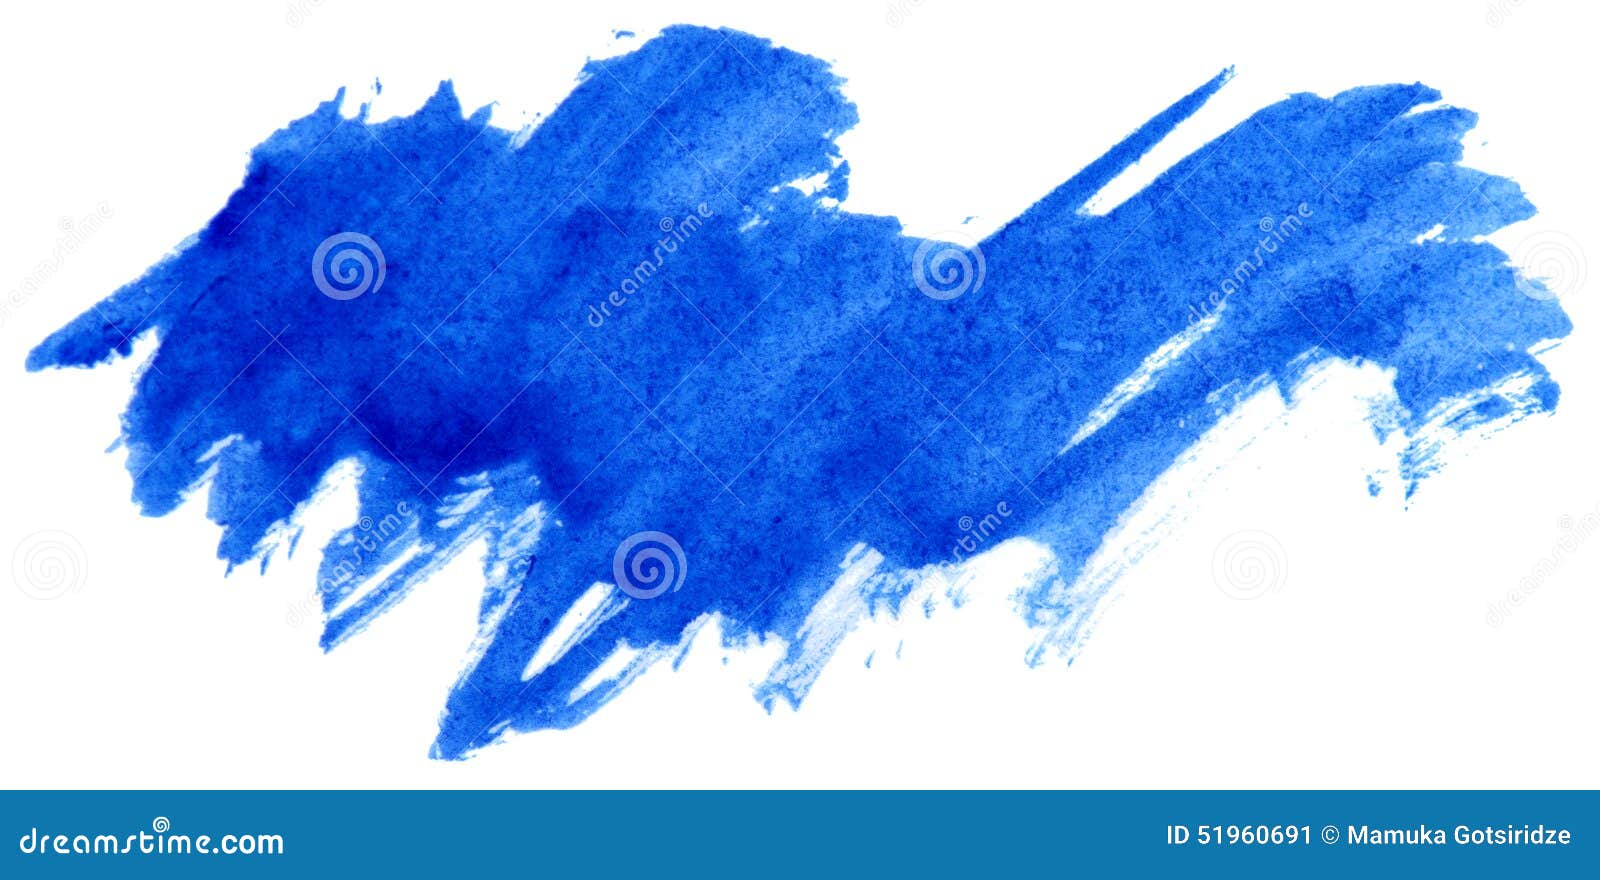 blue watercolor abstract paint stroke